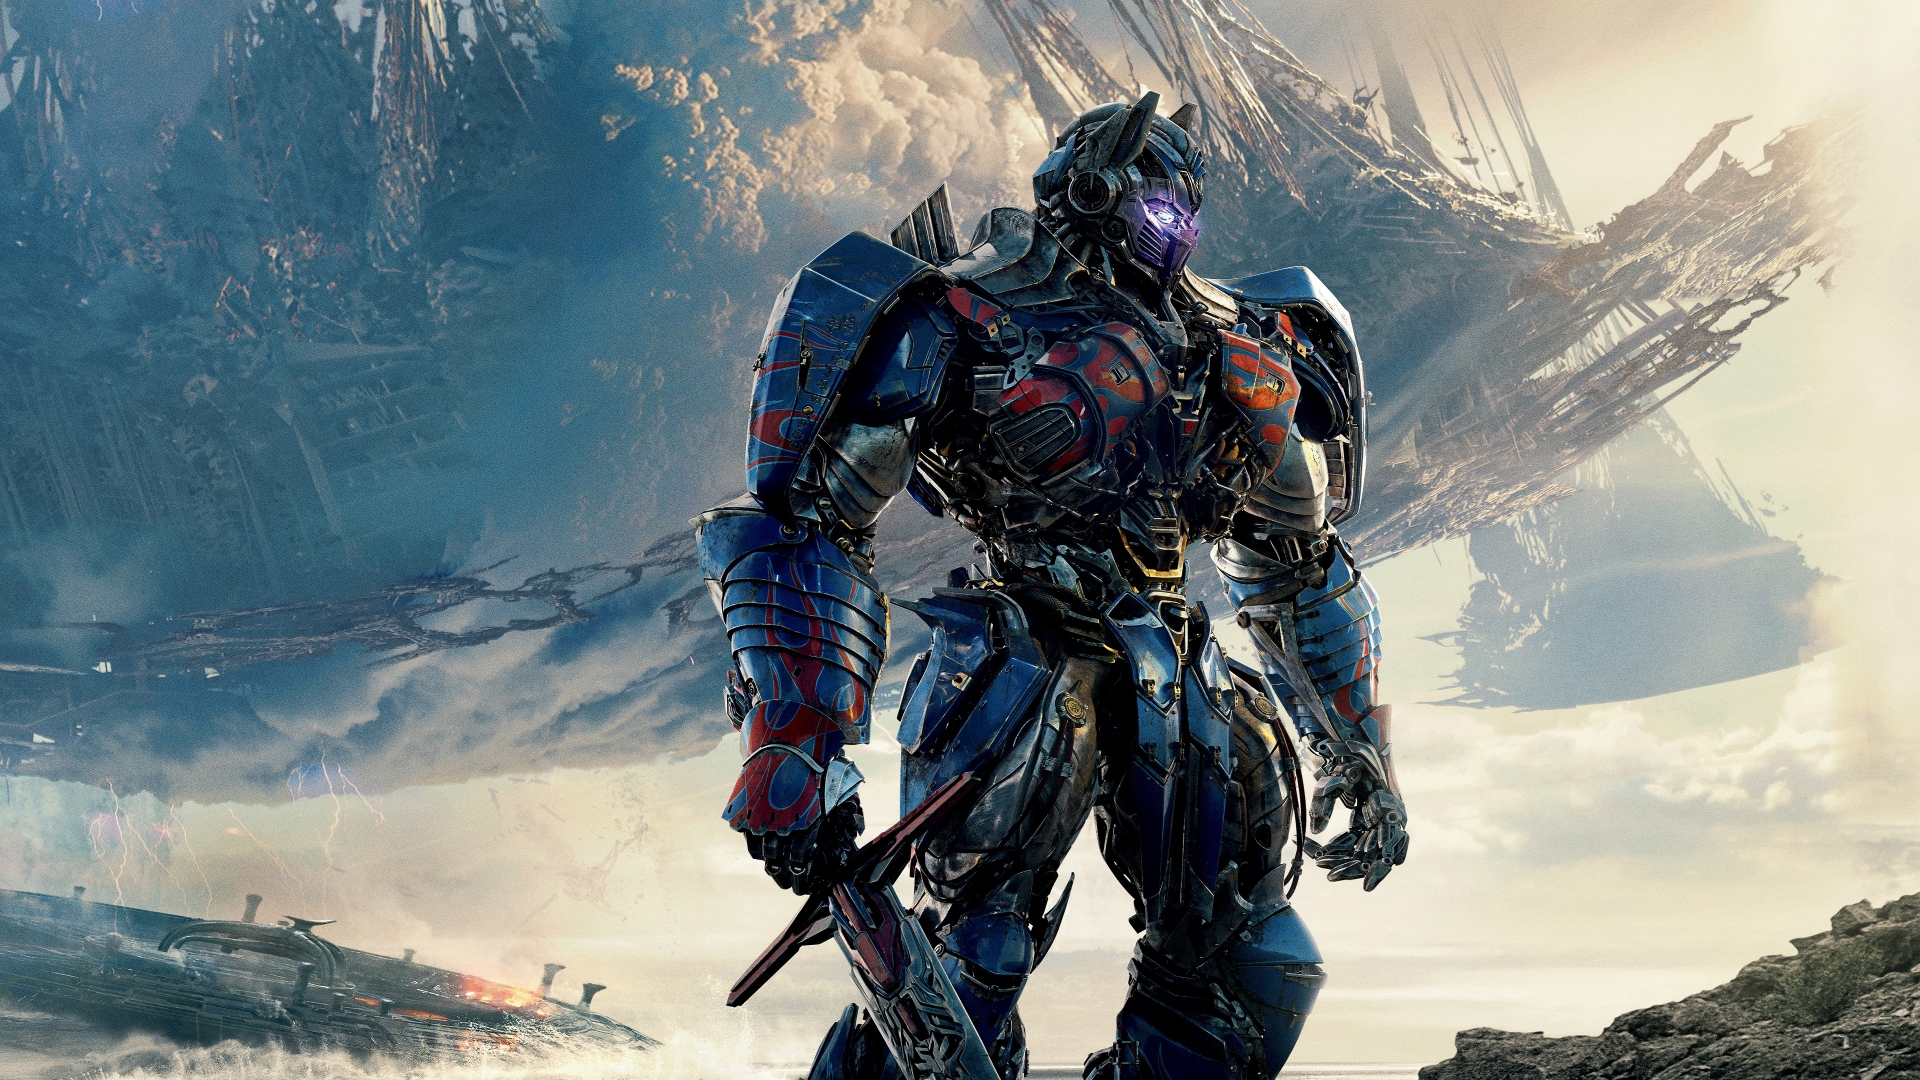 Optimus Prime Transformers The Last Knight for 1920 x 1080 HDTV 1080p resolution